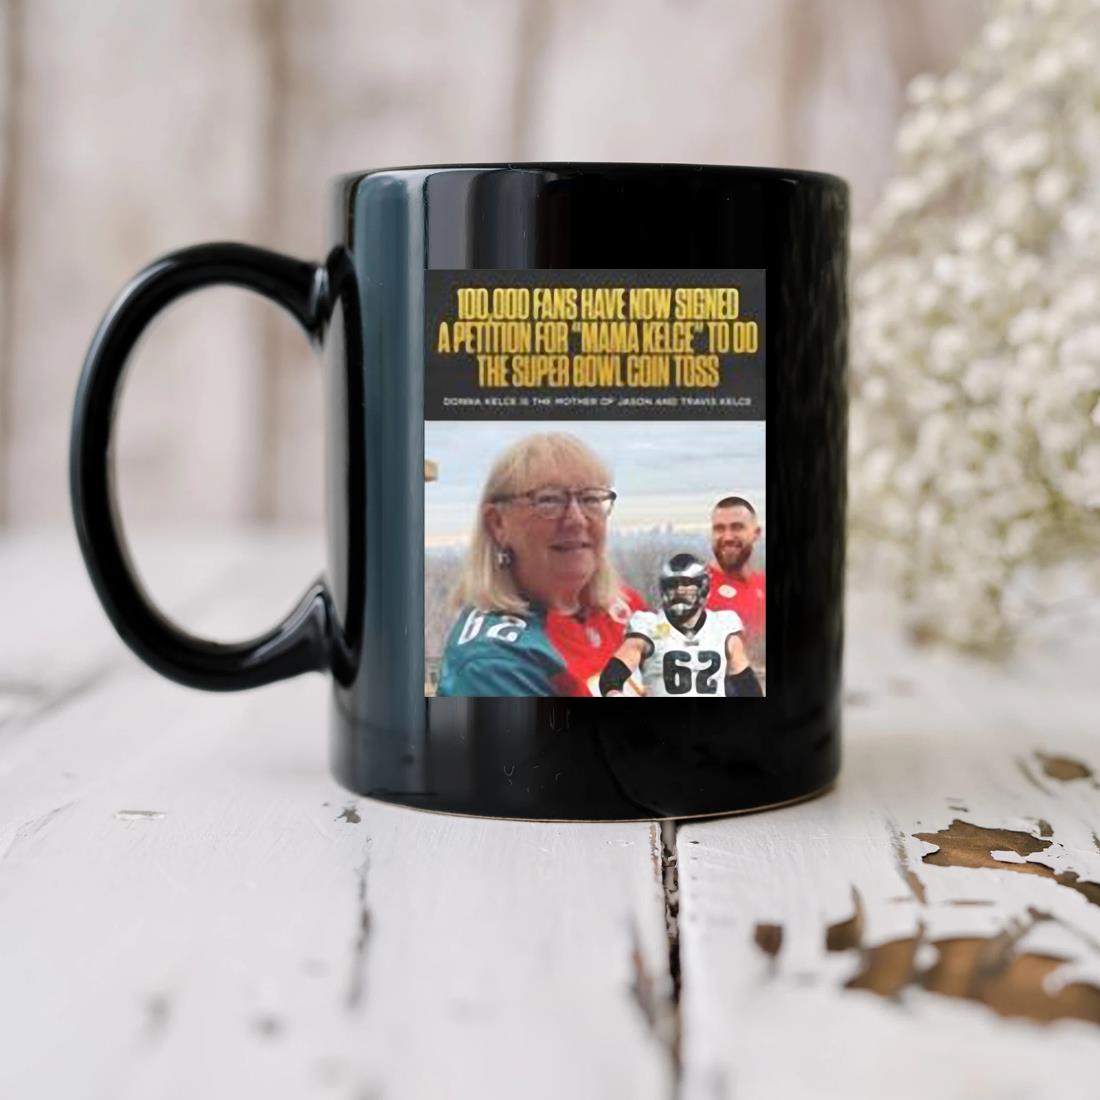 Donna Kelce Is The Mother Of Jason And Travis Kelce 2023 Mug